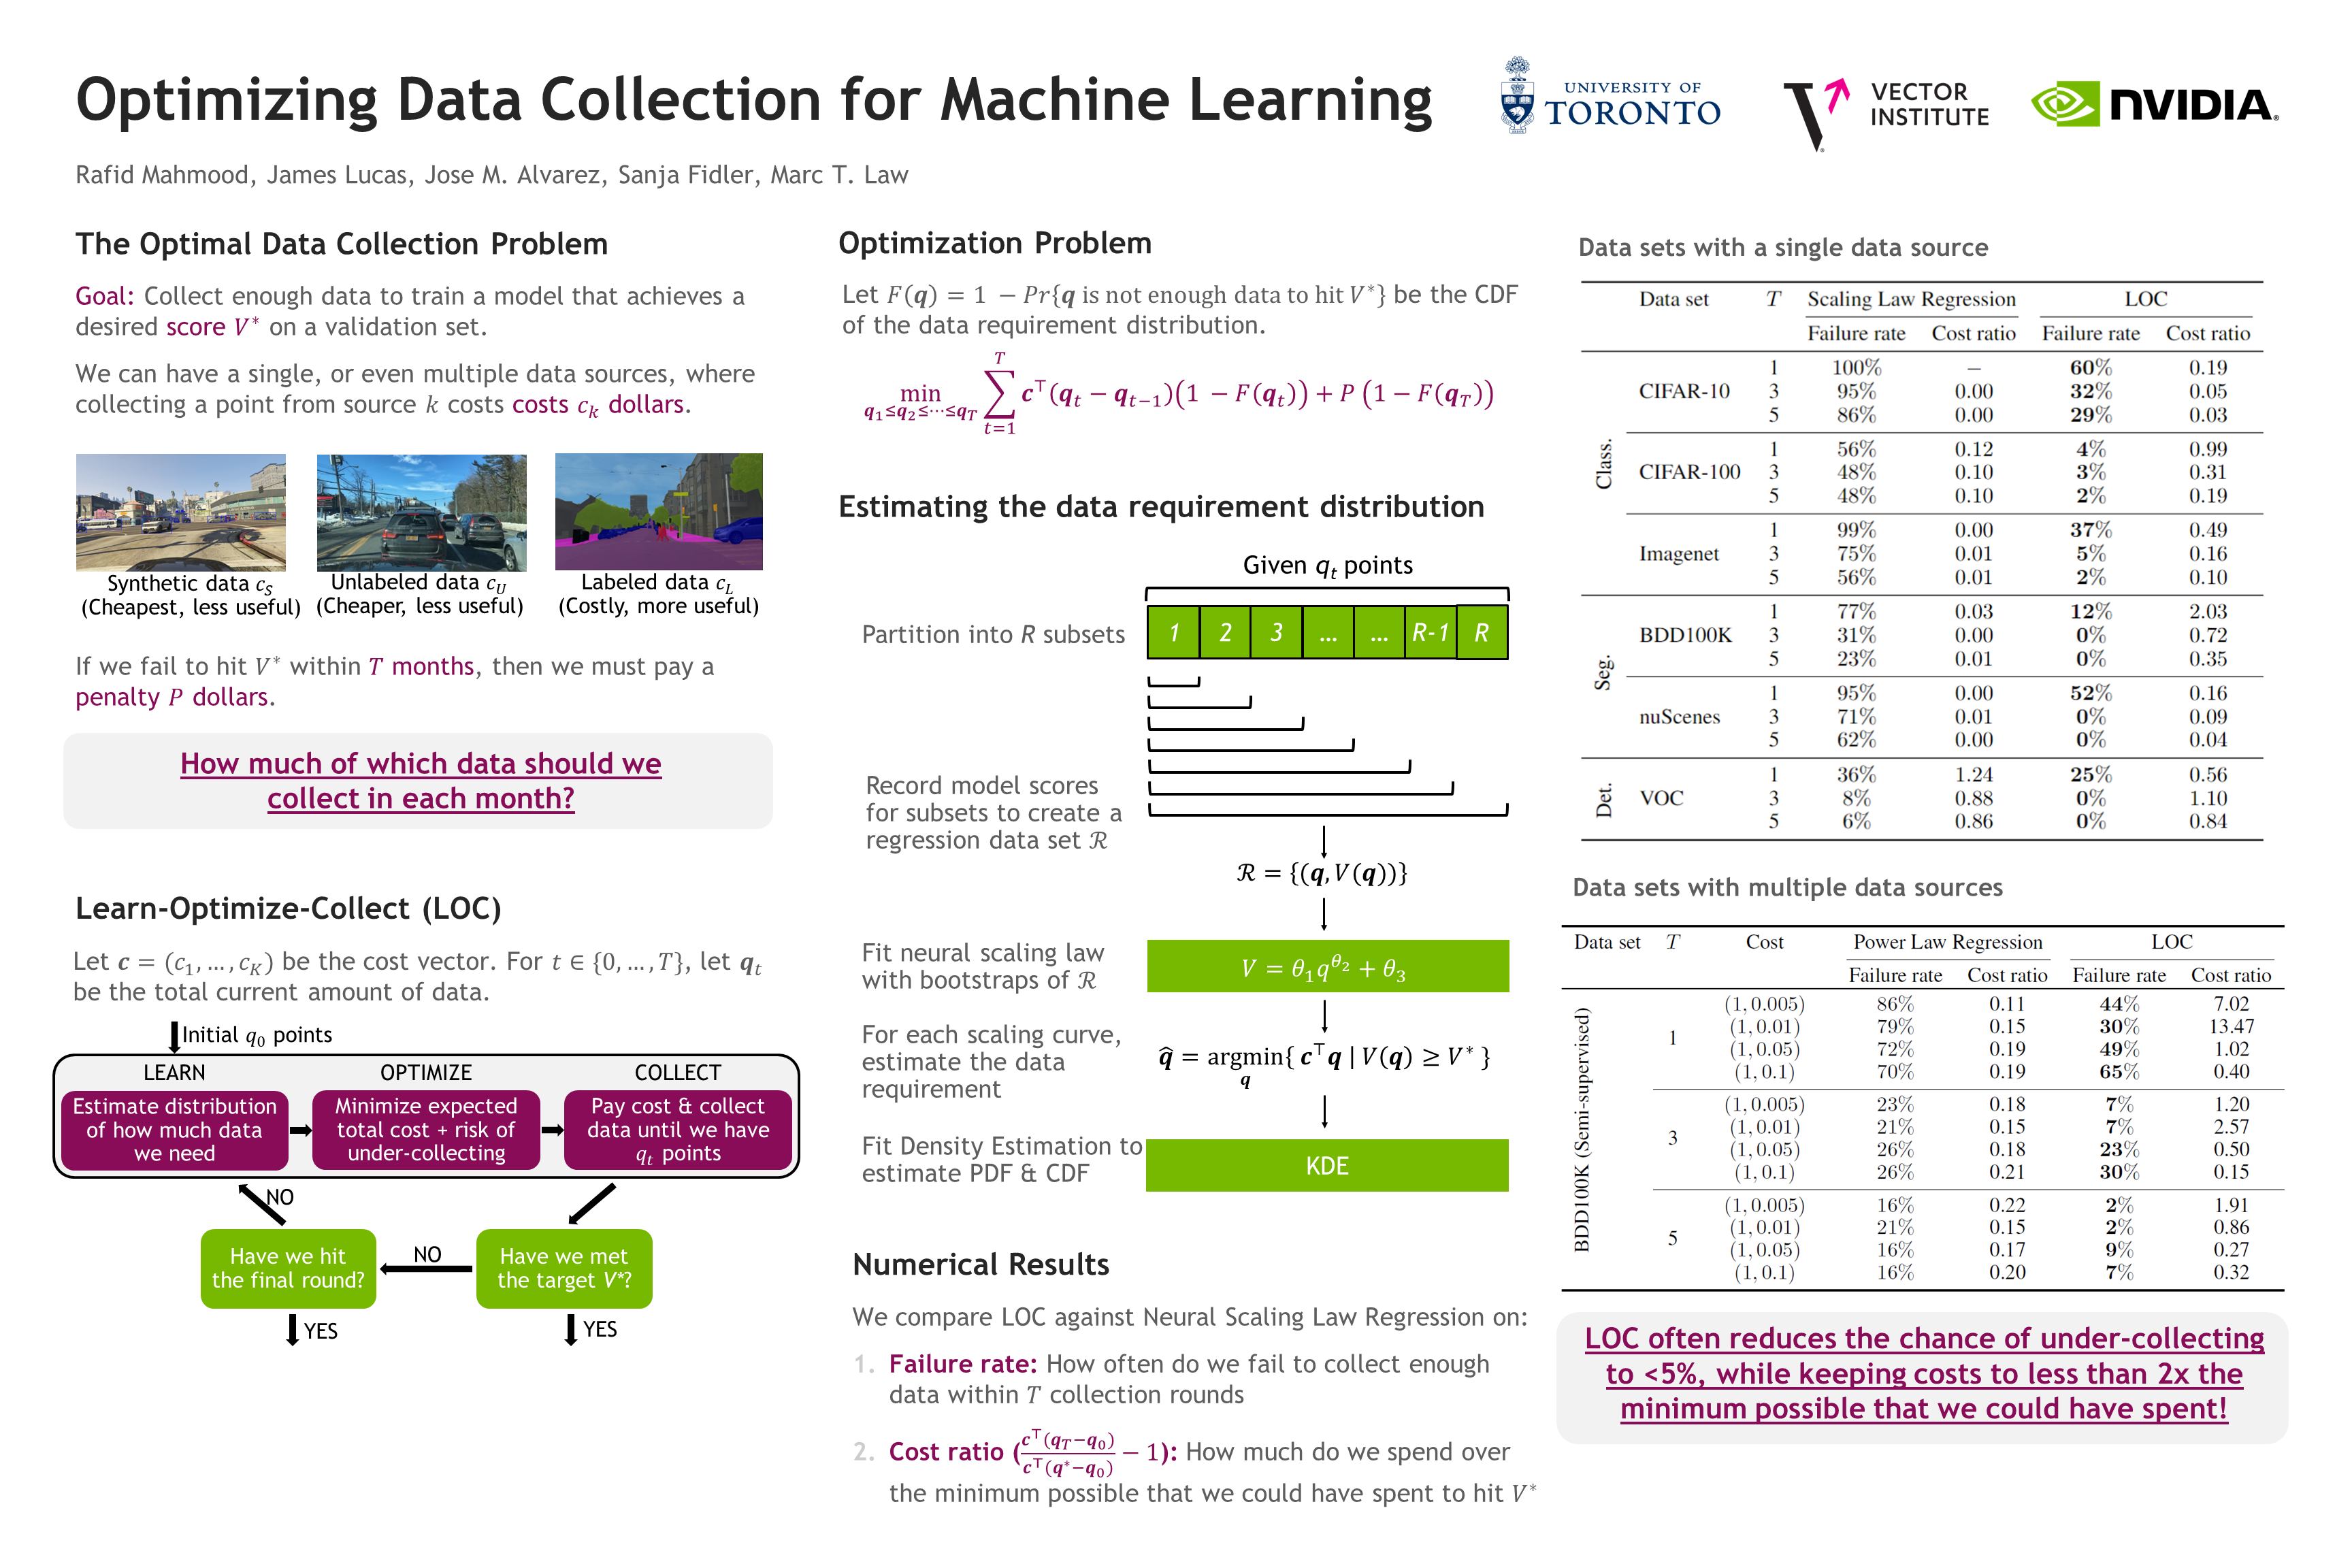 NeurIPS Poster Optimizing Data Collection for Machine Learning